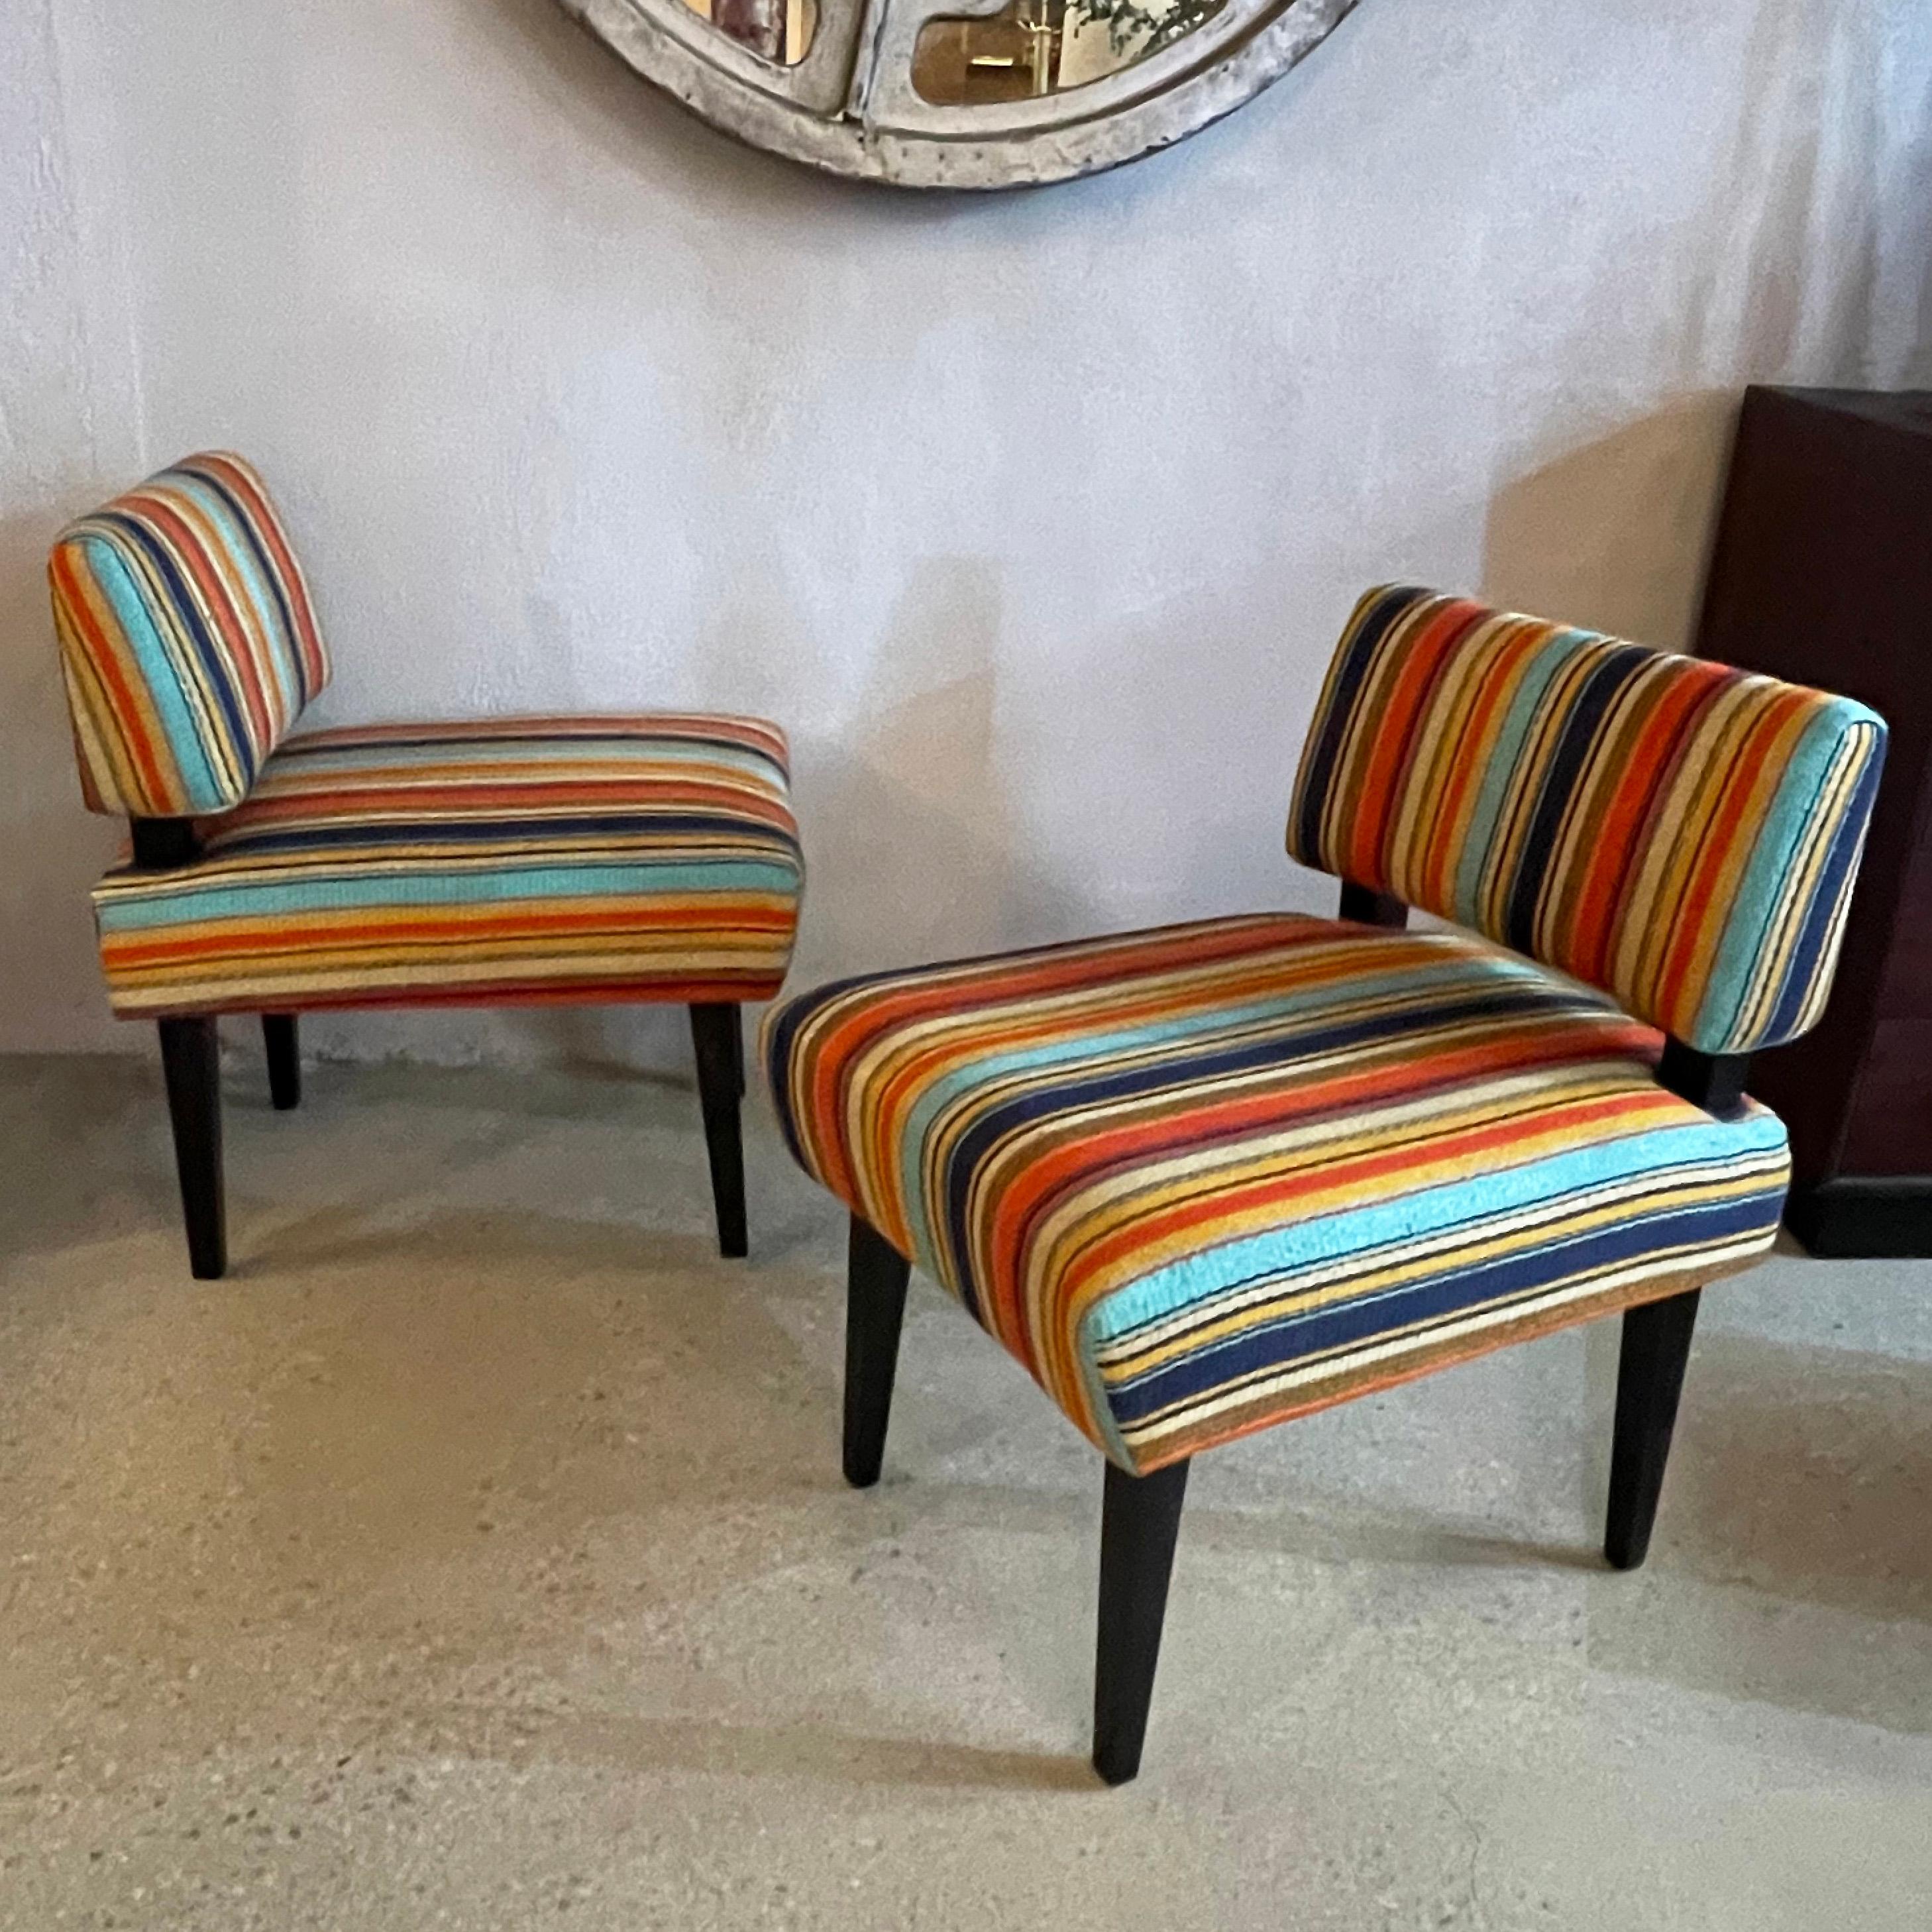 Custom Mid-Century Modern Style Slipper Chairs By cityFoundry In Good Condition For Sale In Brooklyn, NY